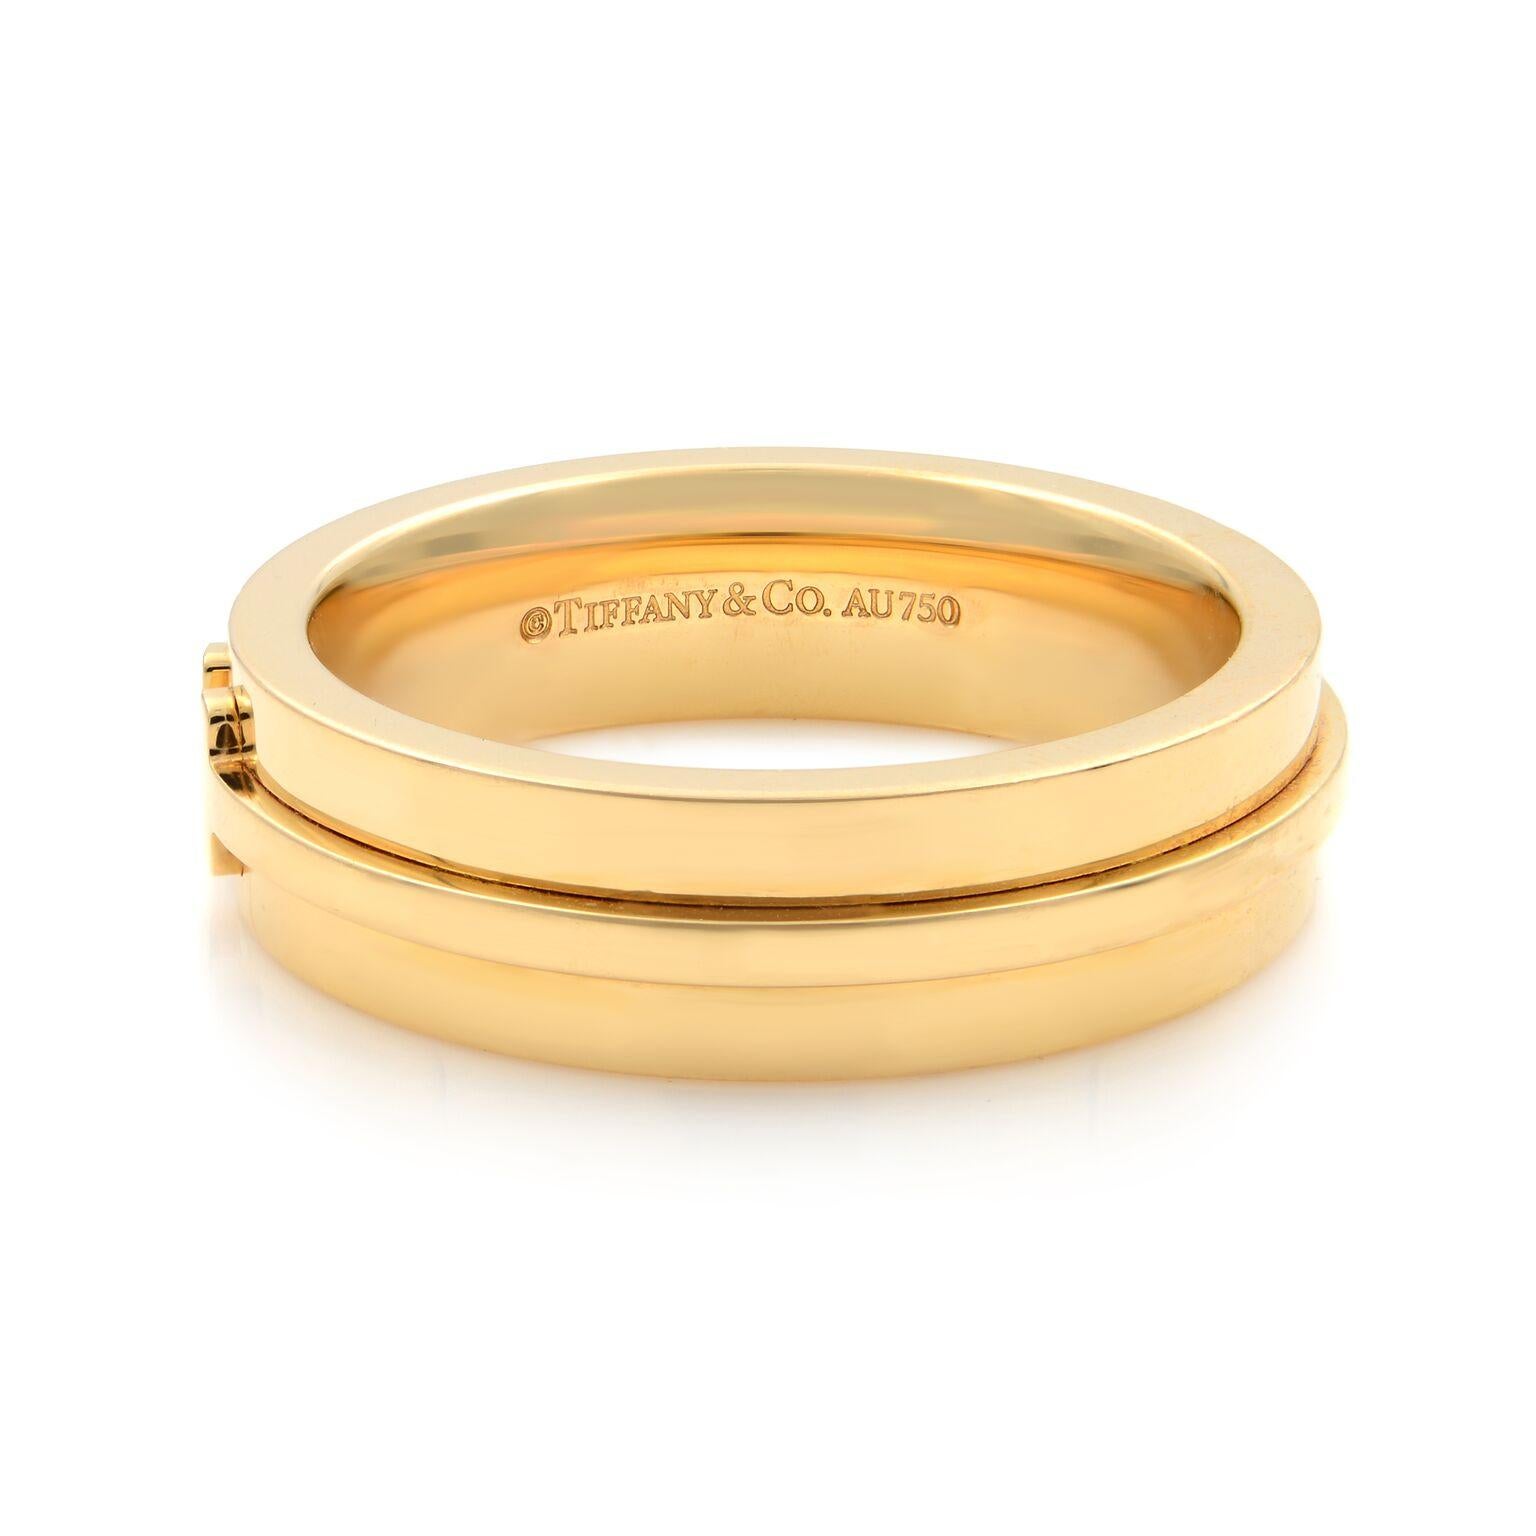 Tiffany & Co T two narrow band. Graphic angles and clean lines blend to create the beautiful clarity of the Tiffany T collection.
Pre-owned, like new 
Material: 18k yellow gold.
Hallmark: Tiffany & Co. Au 750.
Measurement: band is: 5.5mm wide x